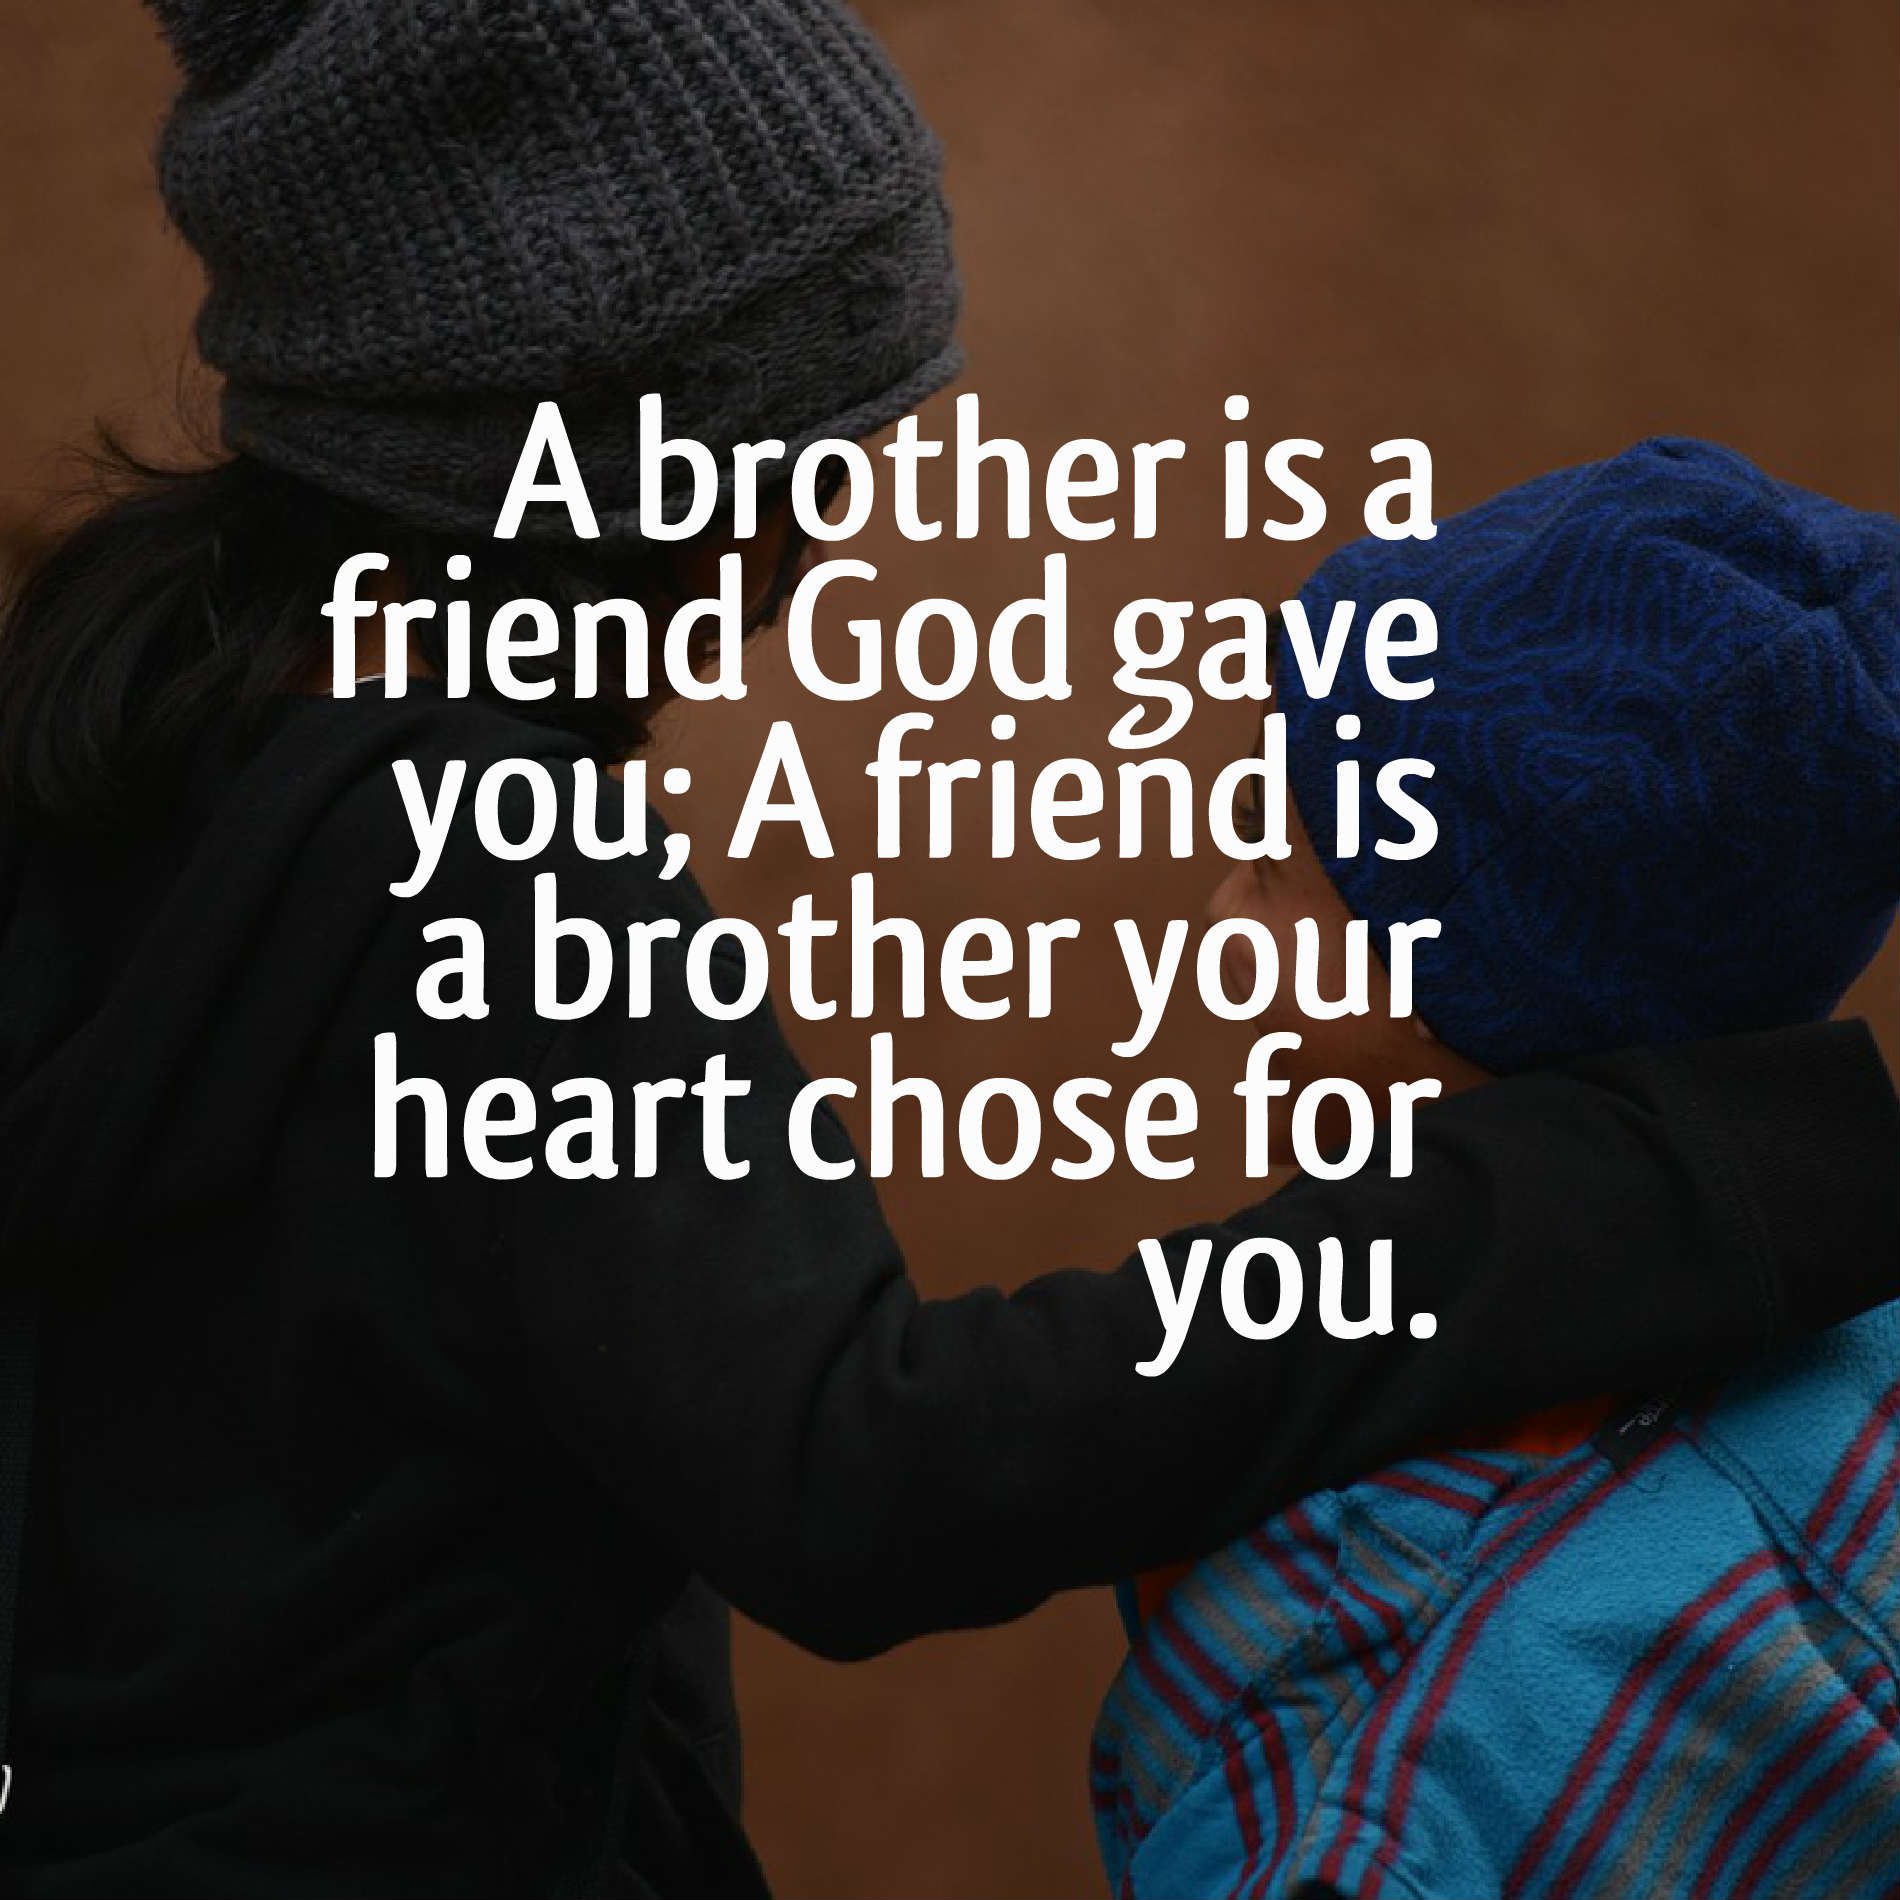 A brother is a friend God gave you; A friend is a brother your heart chose for you.